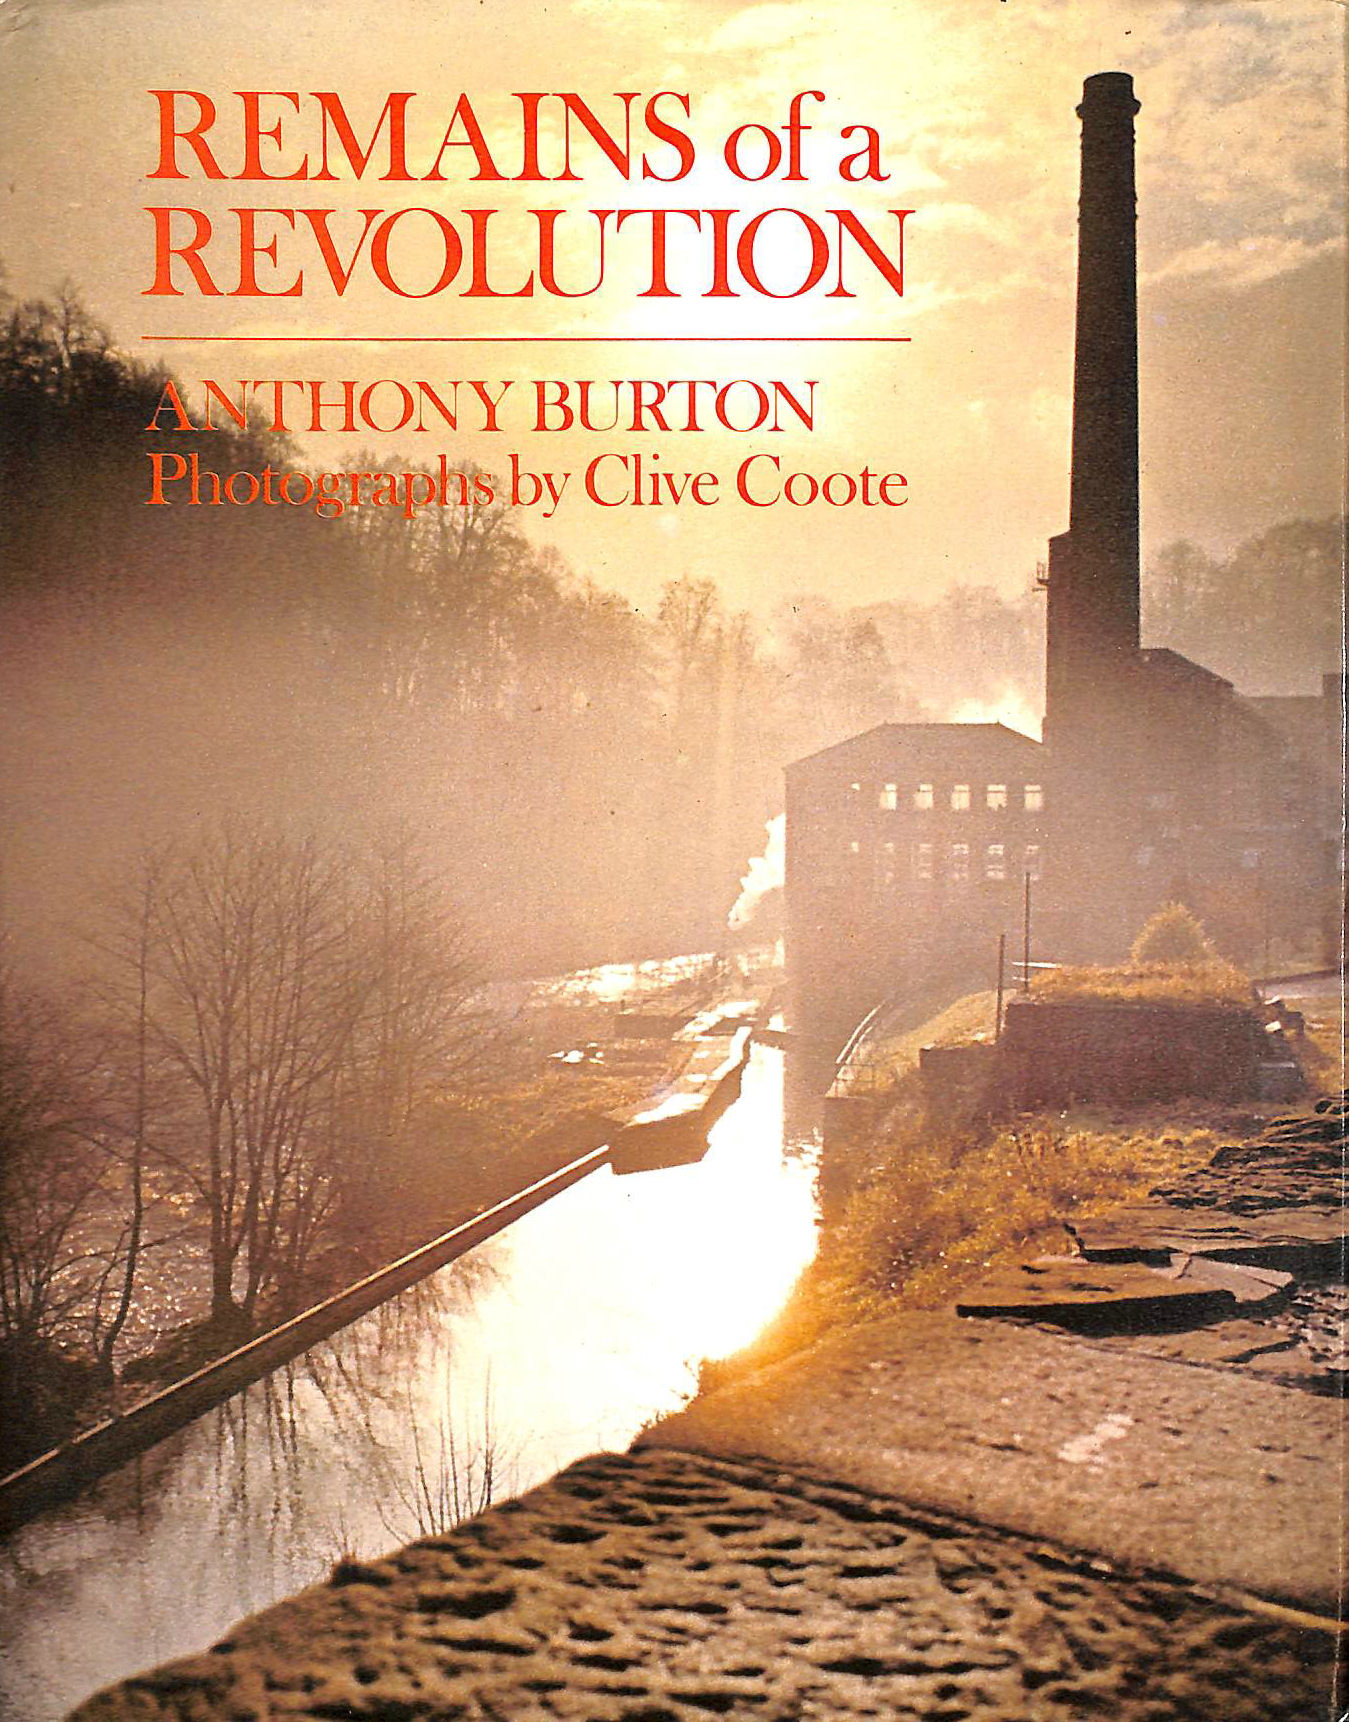 ANTHONY BURTON; CLIVE COOTE [PHOTOGRAPHER] - Remains of a Revolution